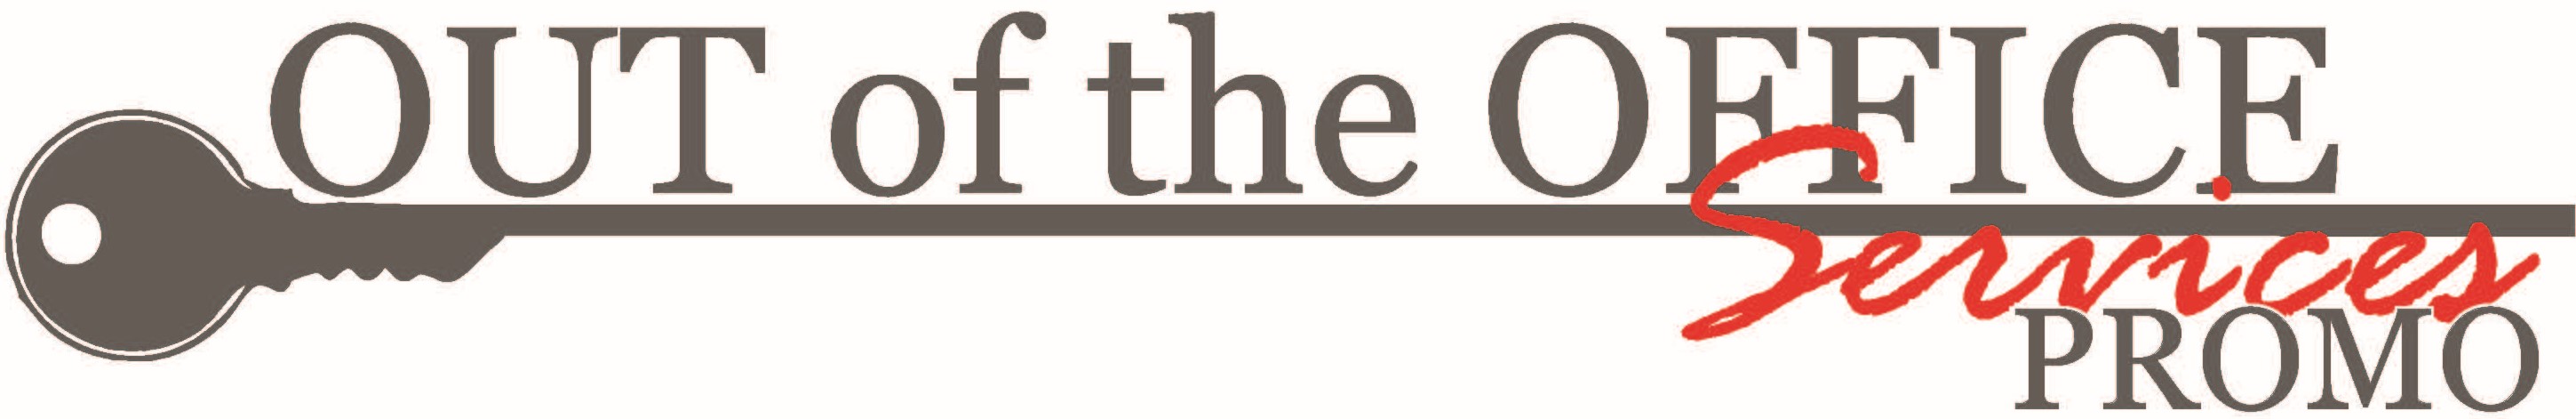 Out of the Office Services, LLC's Logo